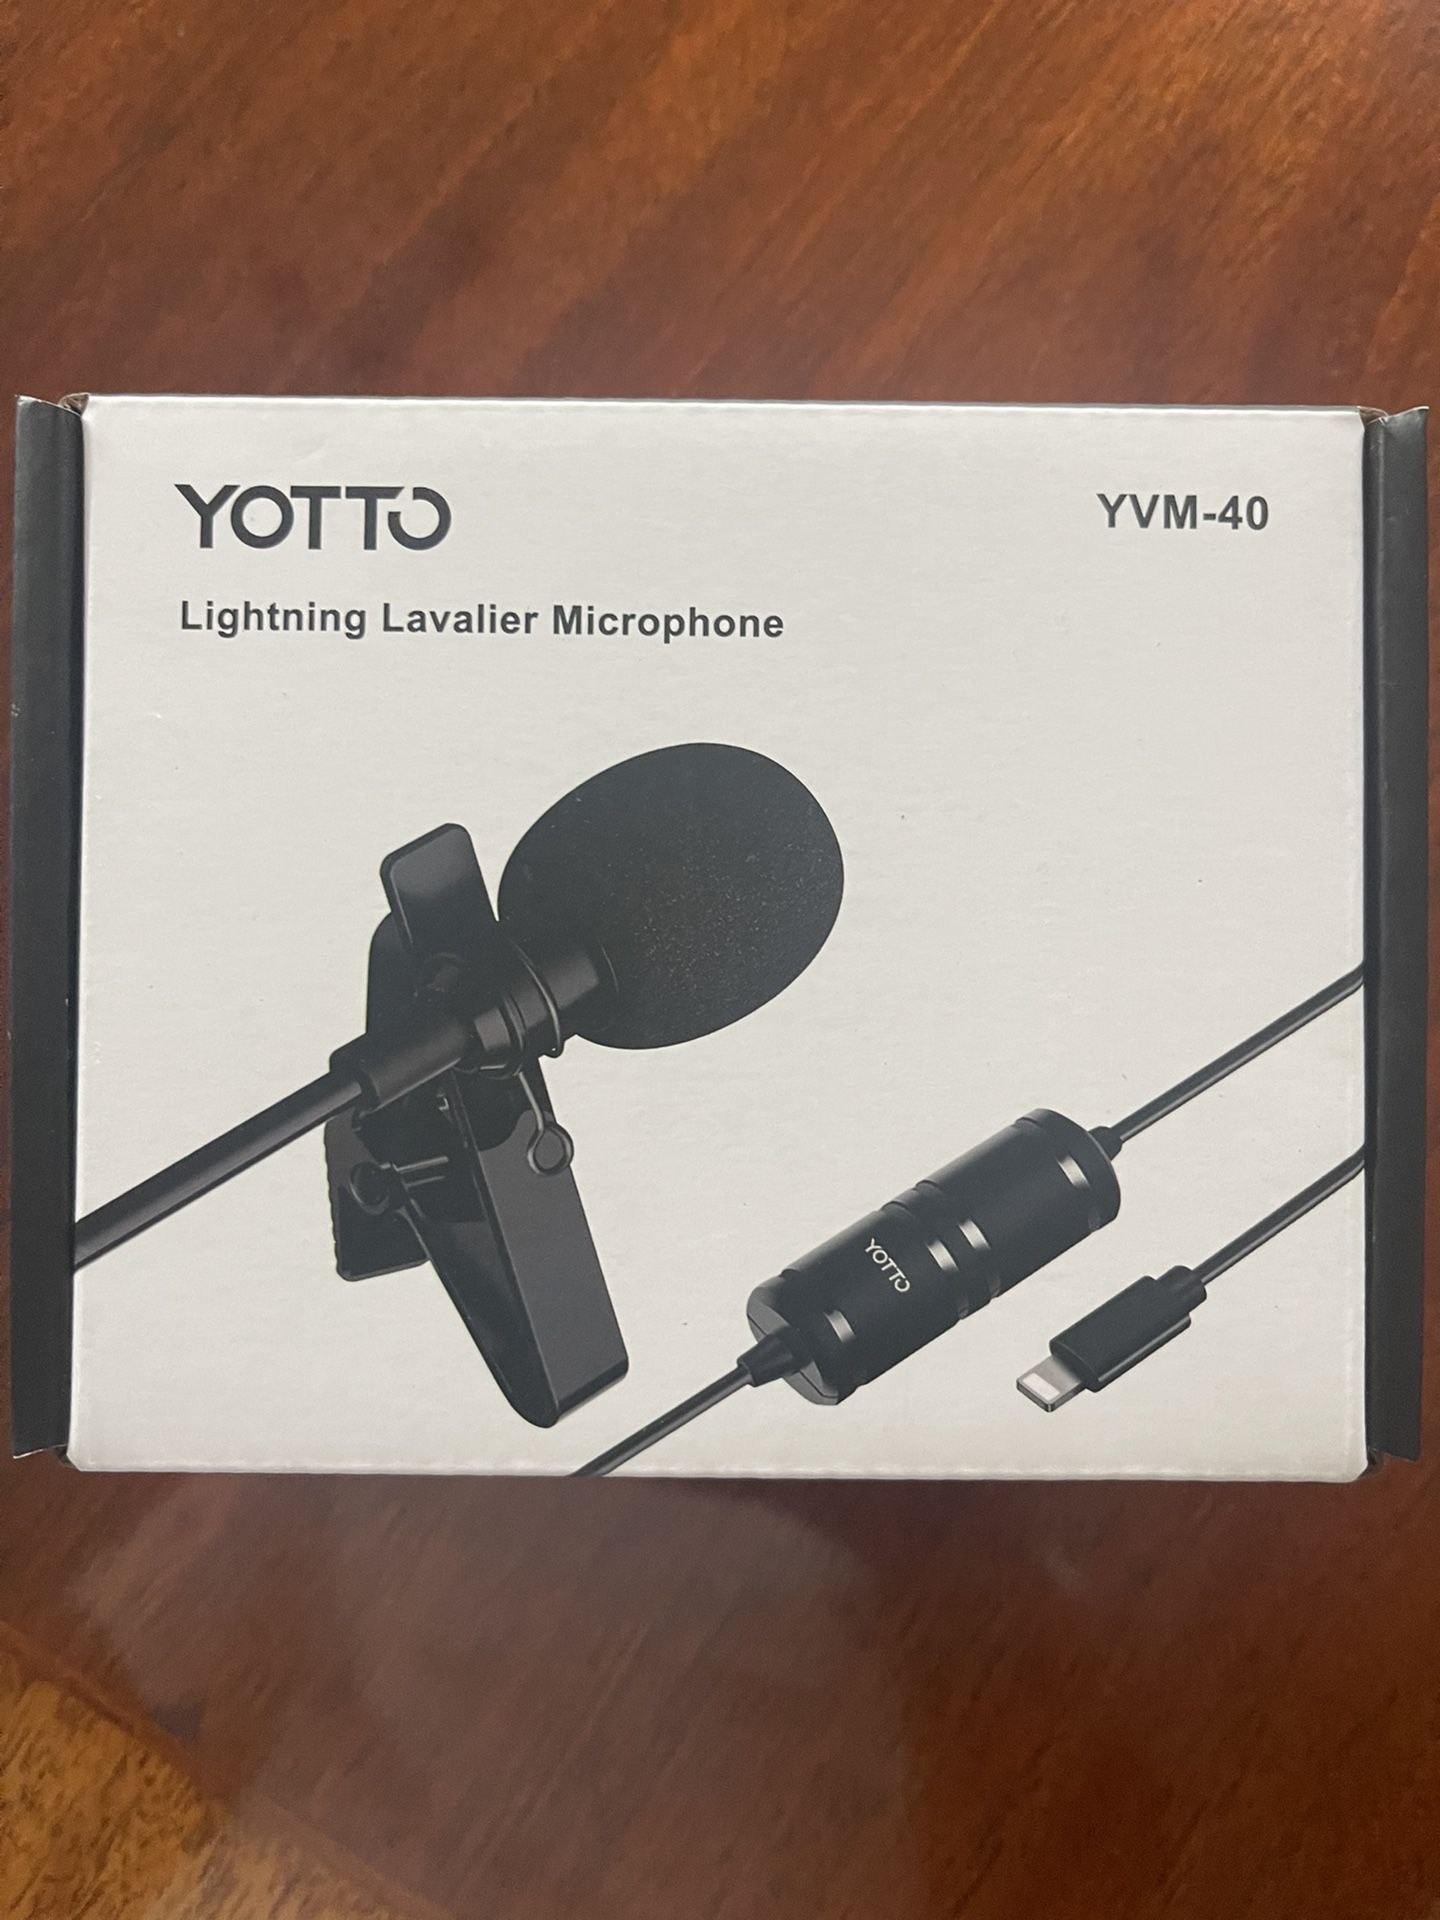 Yotto Microphone for Sale in Seattle, WA - OfferUp